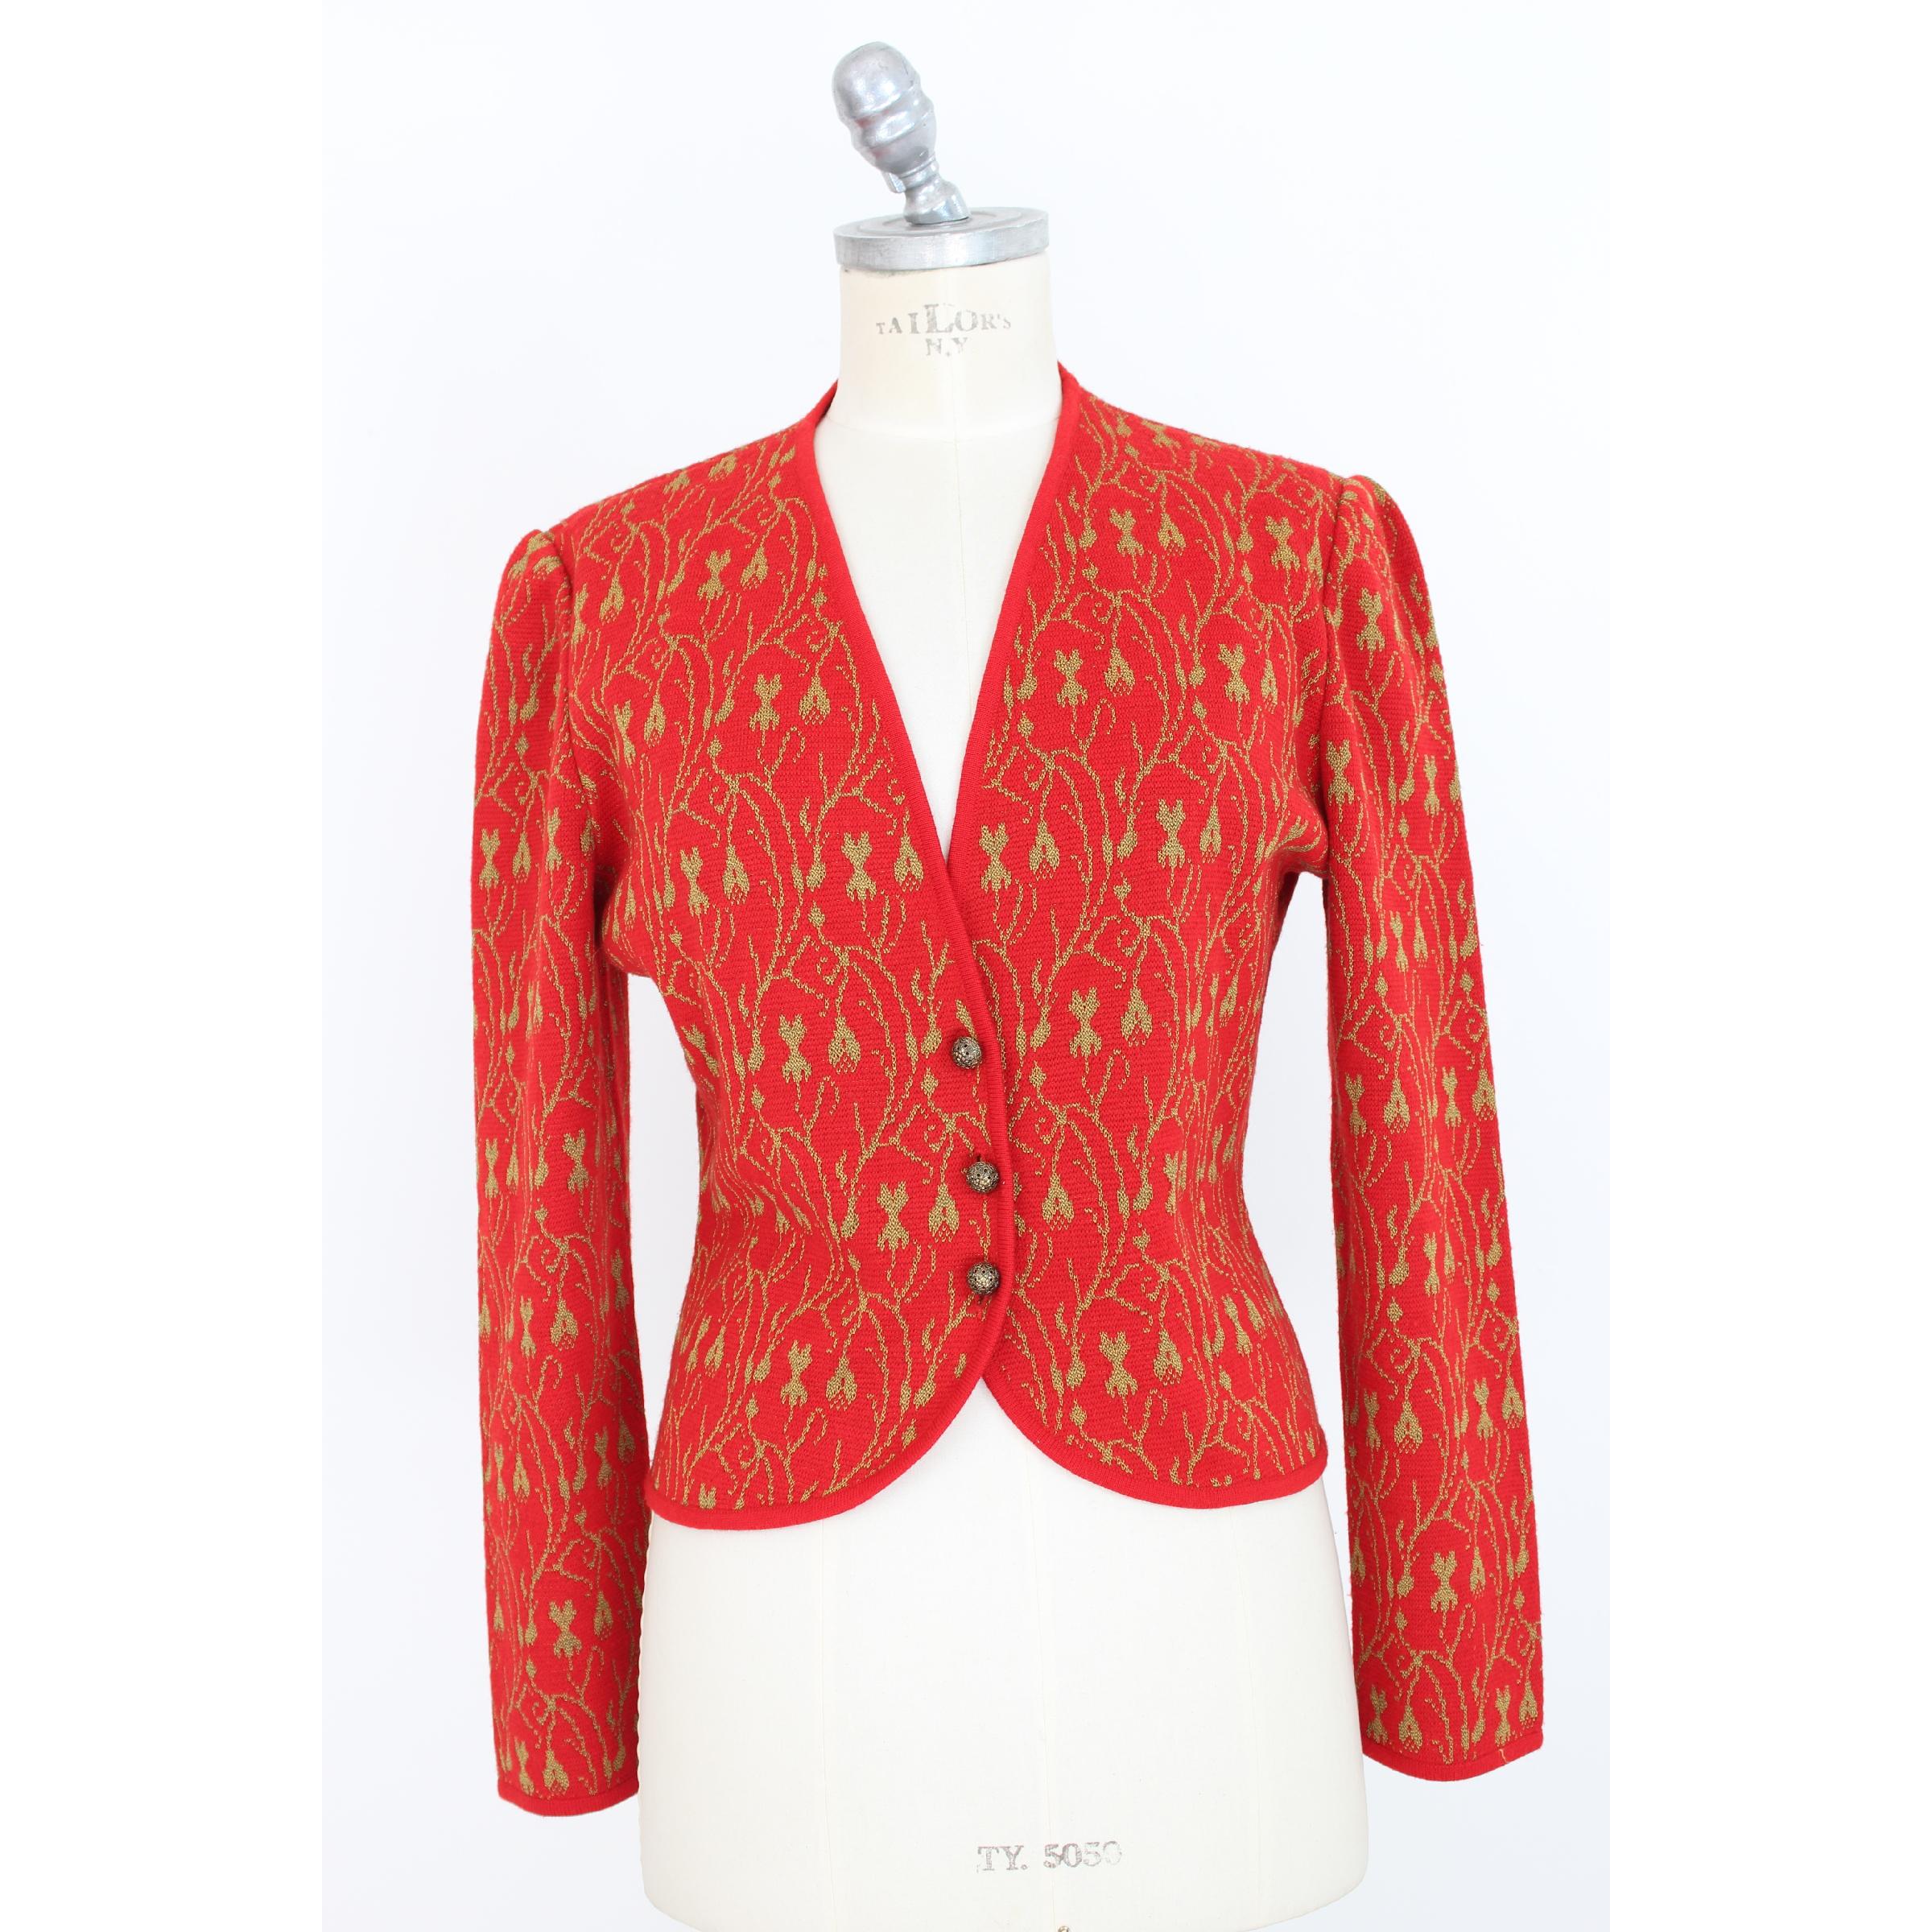 Emanuel Ungaro vintage women's jacket, wool cardigan model, red with golden flowers. Buttons jewel. 1990s. Made in Italy. Excellent vintage conditions.

Size: 44 It 10 US 12 Uk

Shoulder: 44 cm
Bust / Chest: 50 cm
Sleeve: 60 cm
Length: 53 cm